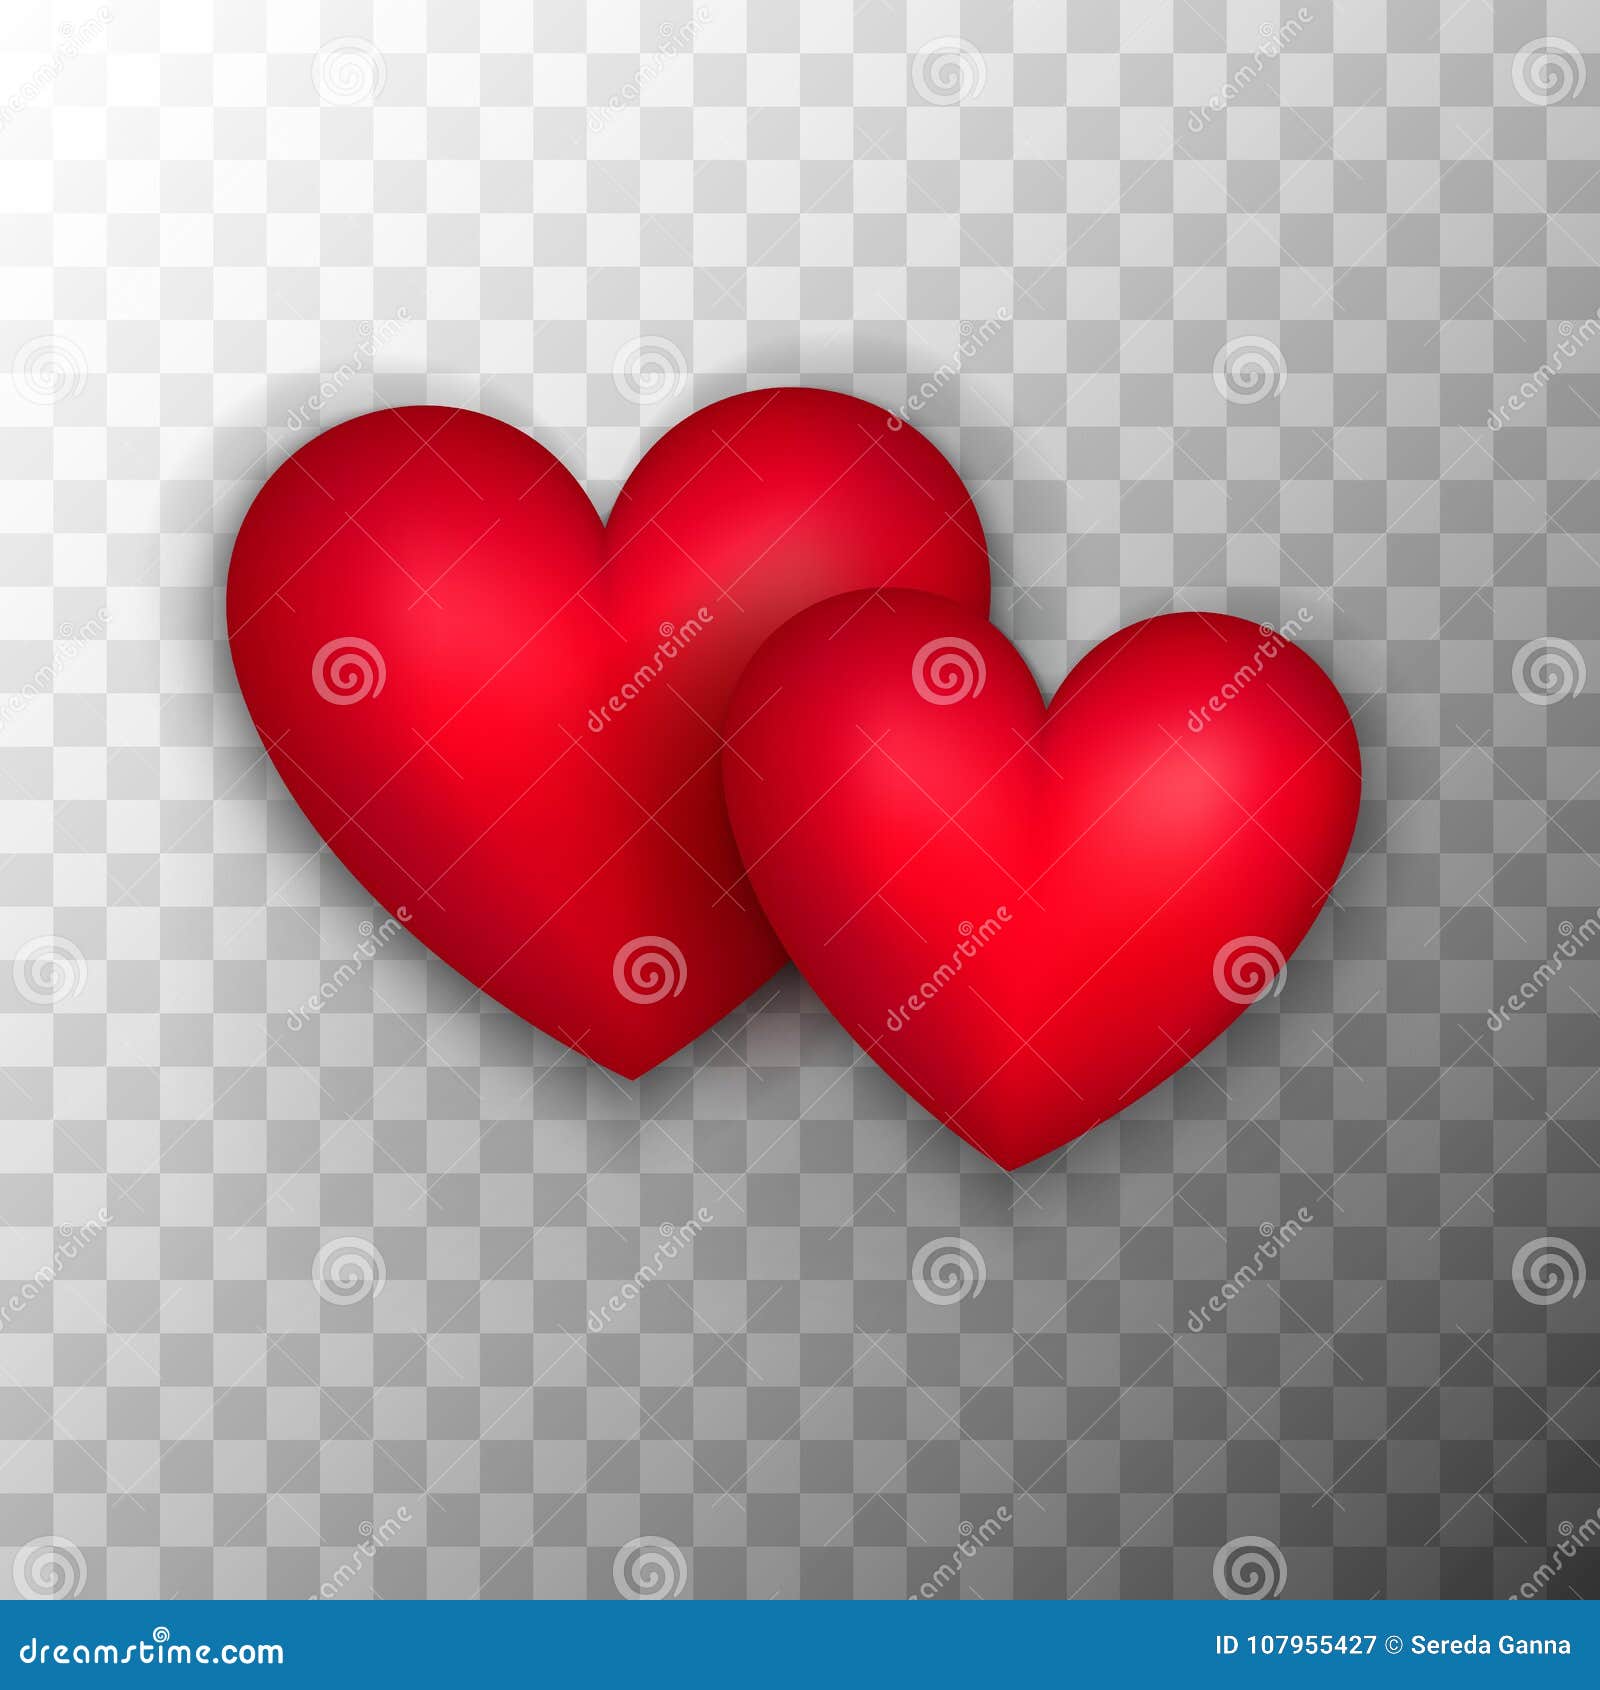 Red heart Stock Photos, Royalty Free Red heart Images